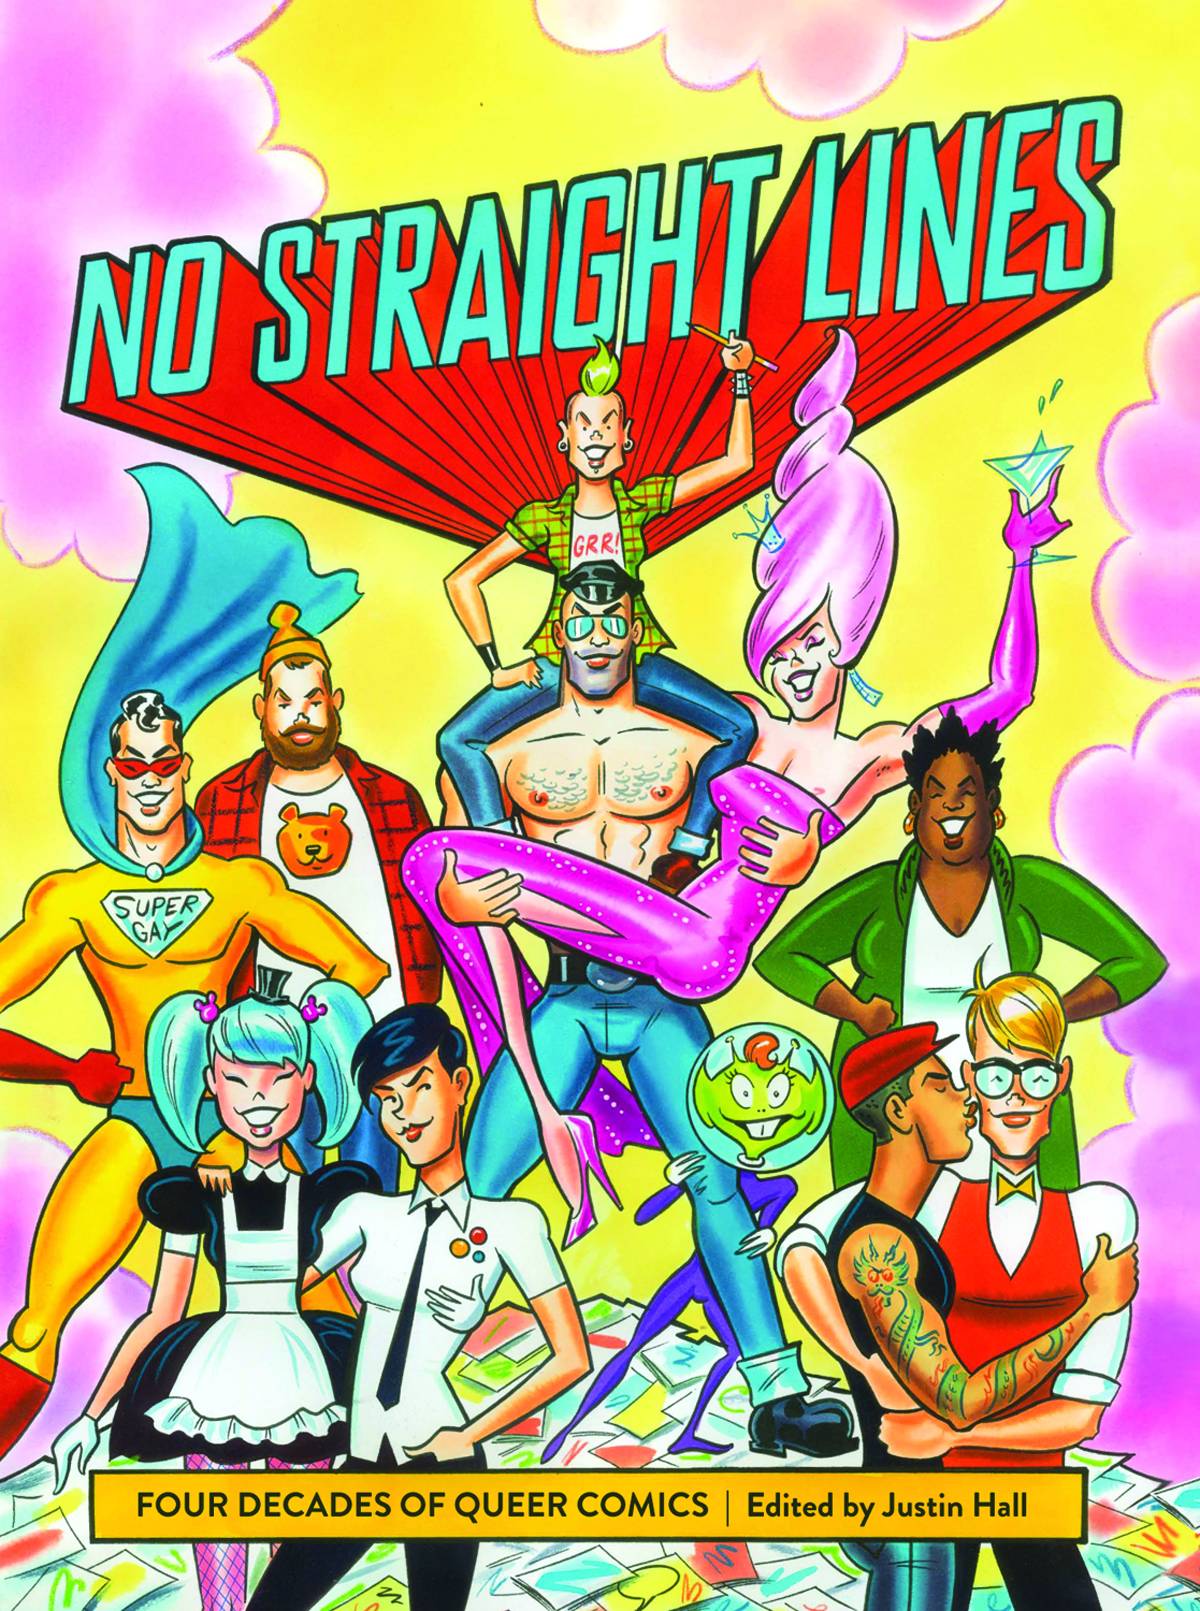 No Straight Lines Queer Comics Graphic Novel